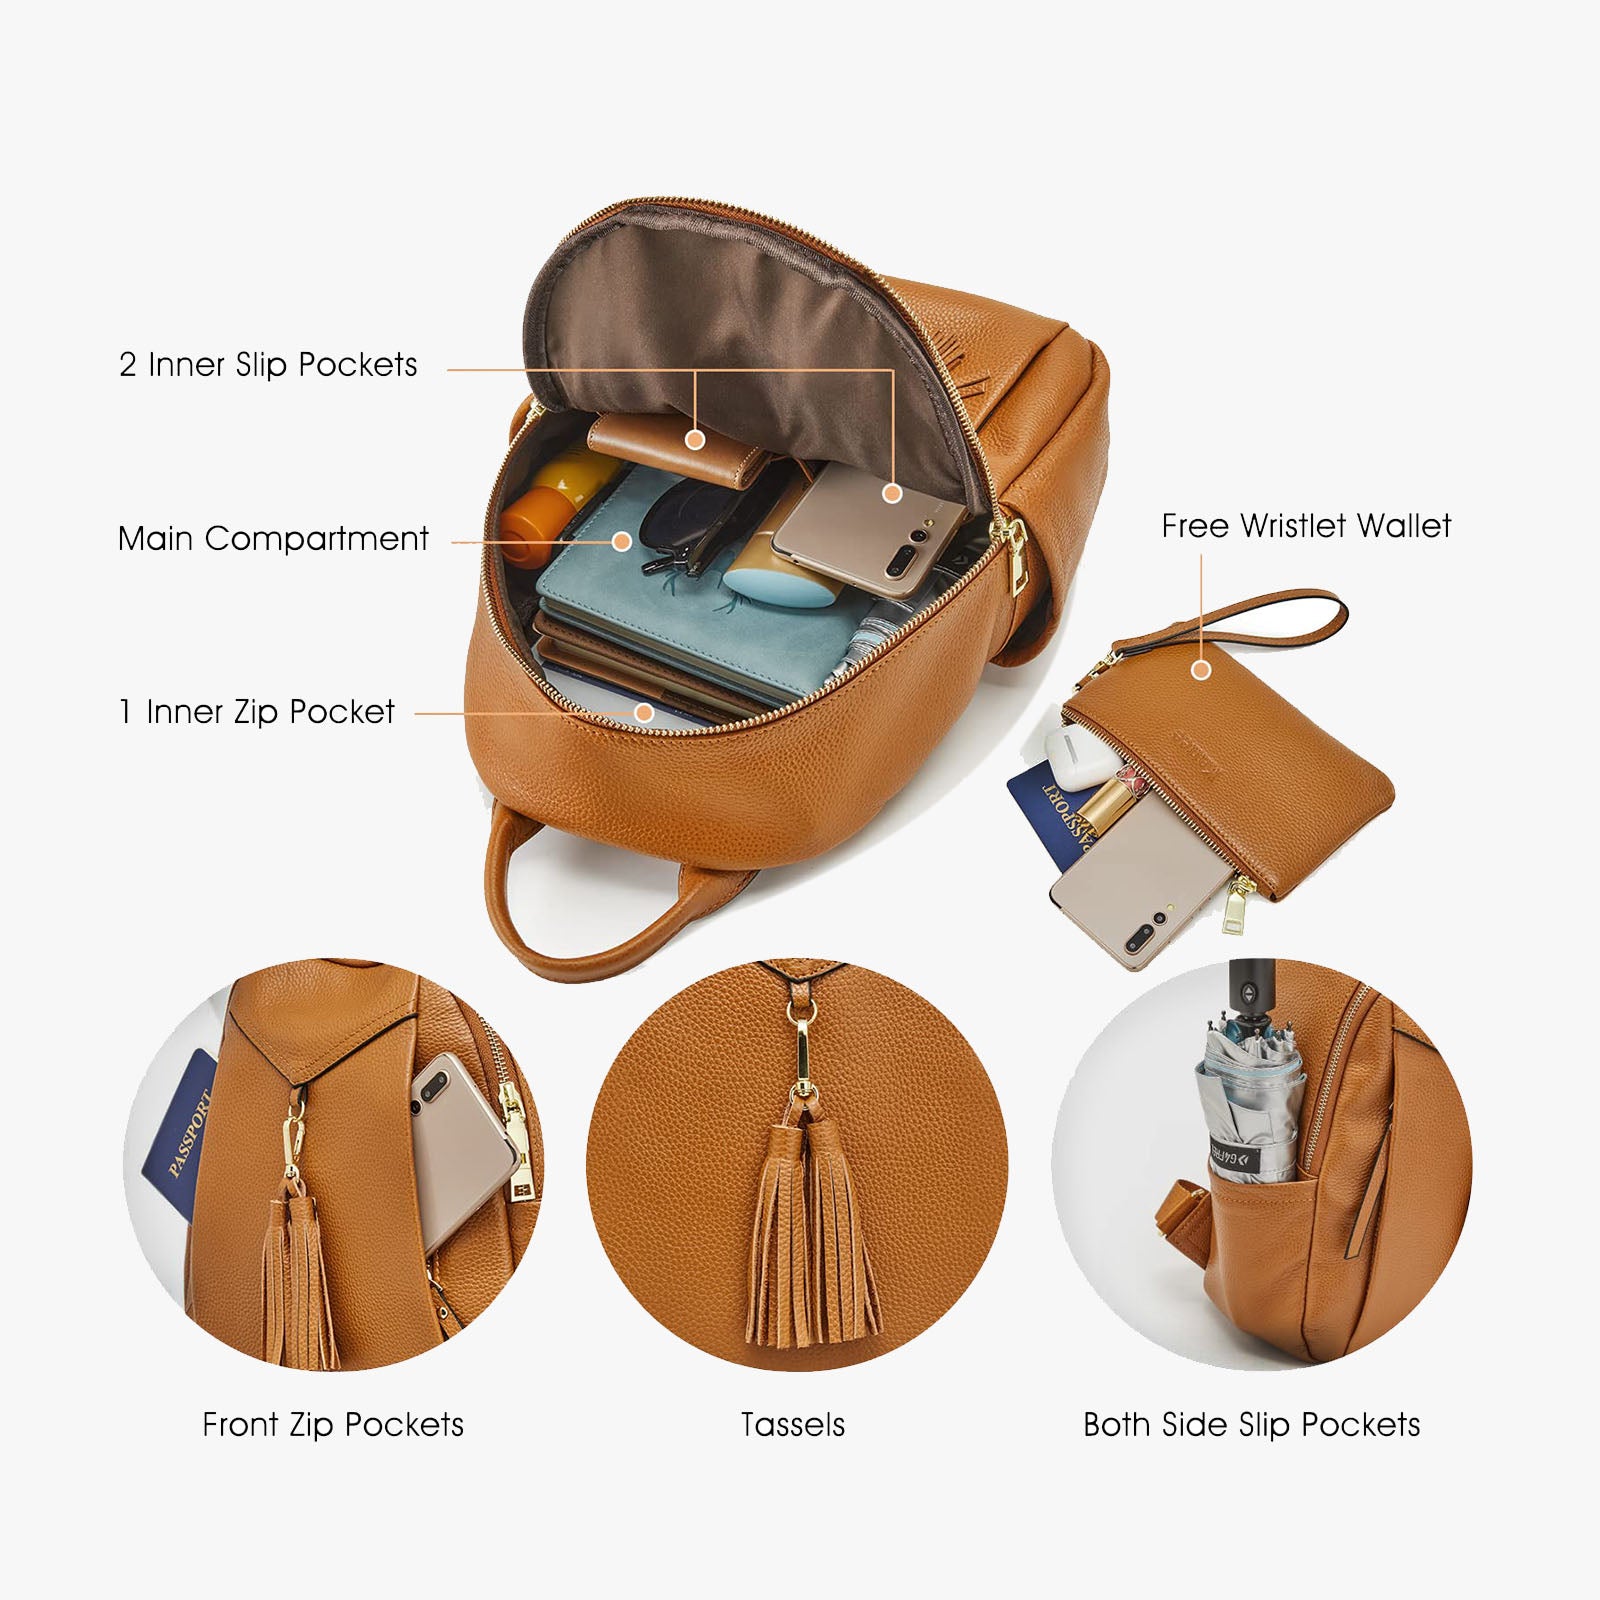 Soft Casual Daypack Fashion Backpack with Wristlet Wallet